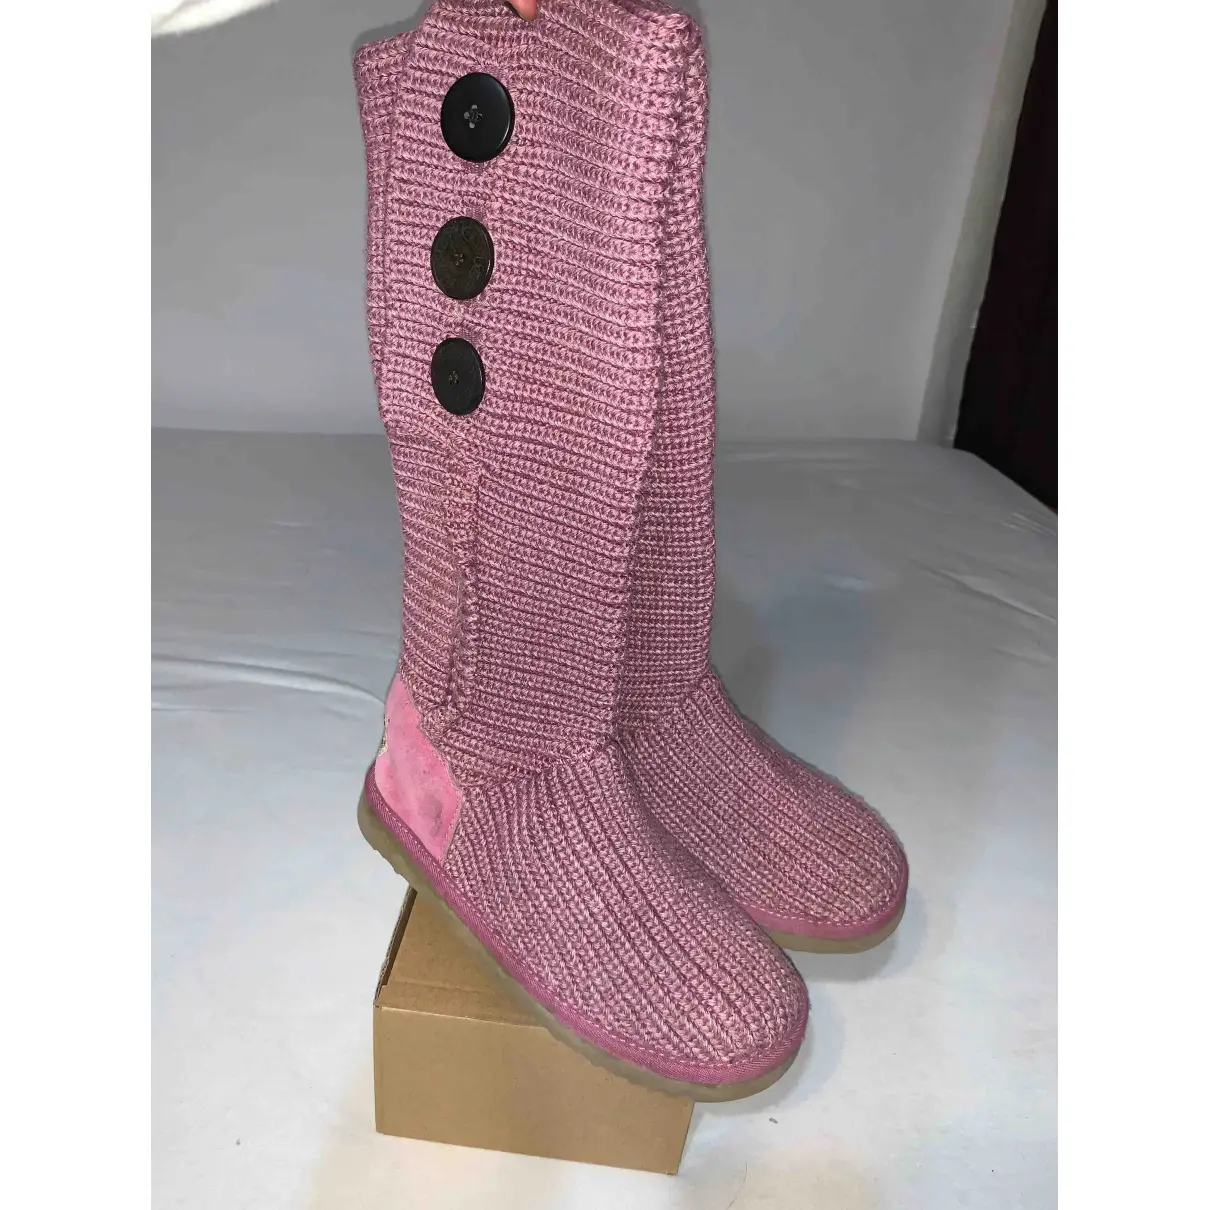 Buy Ugg Cloth snow boots online